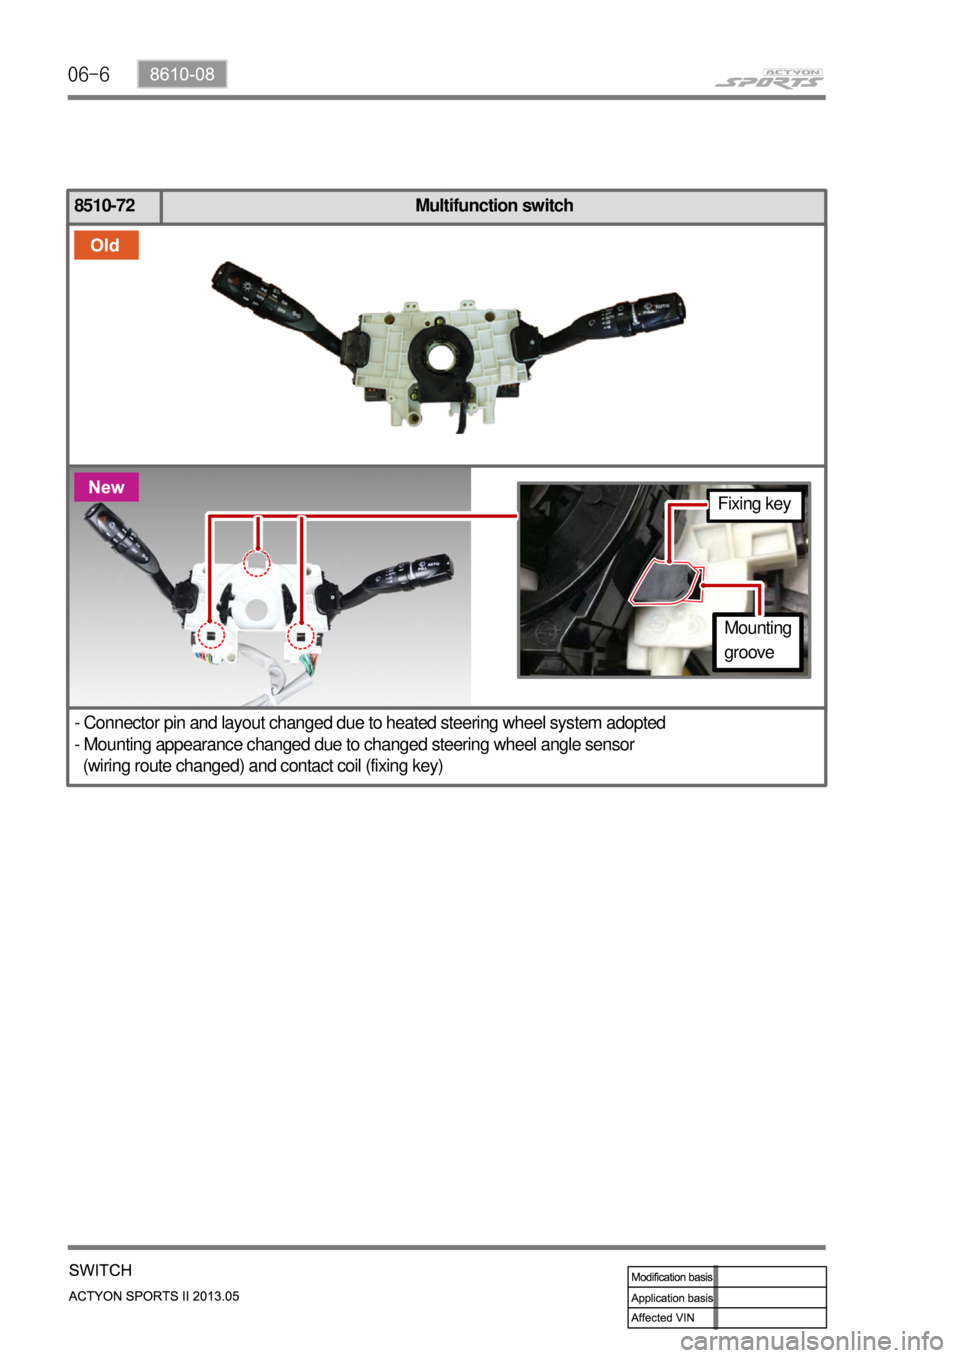 SSANGYONG NEW ACTYON SPORTS 2013  Service Manual 06-6
8510-72 Multifunction switch
- Connector pin and layout changed due to heated steering wheel system adopted
- Mounting appearance changed due to changed steering wheel angle sensor 
  (wiring rou